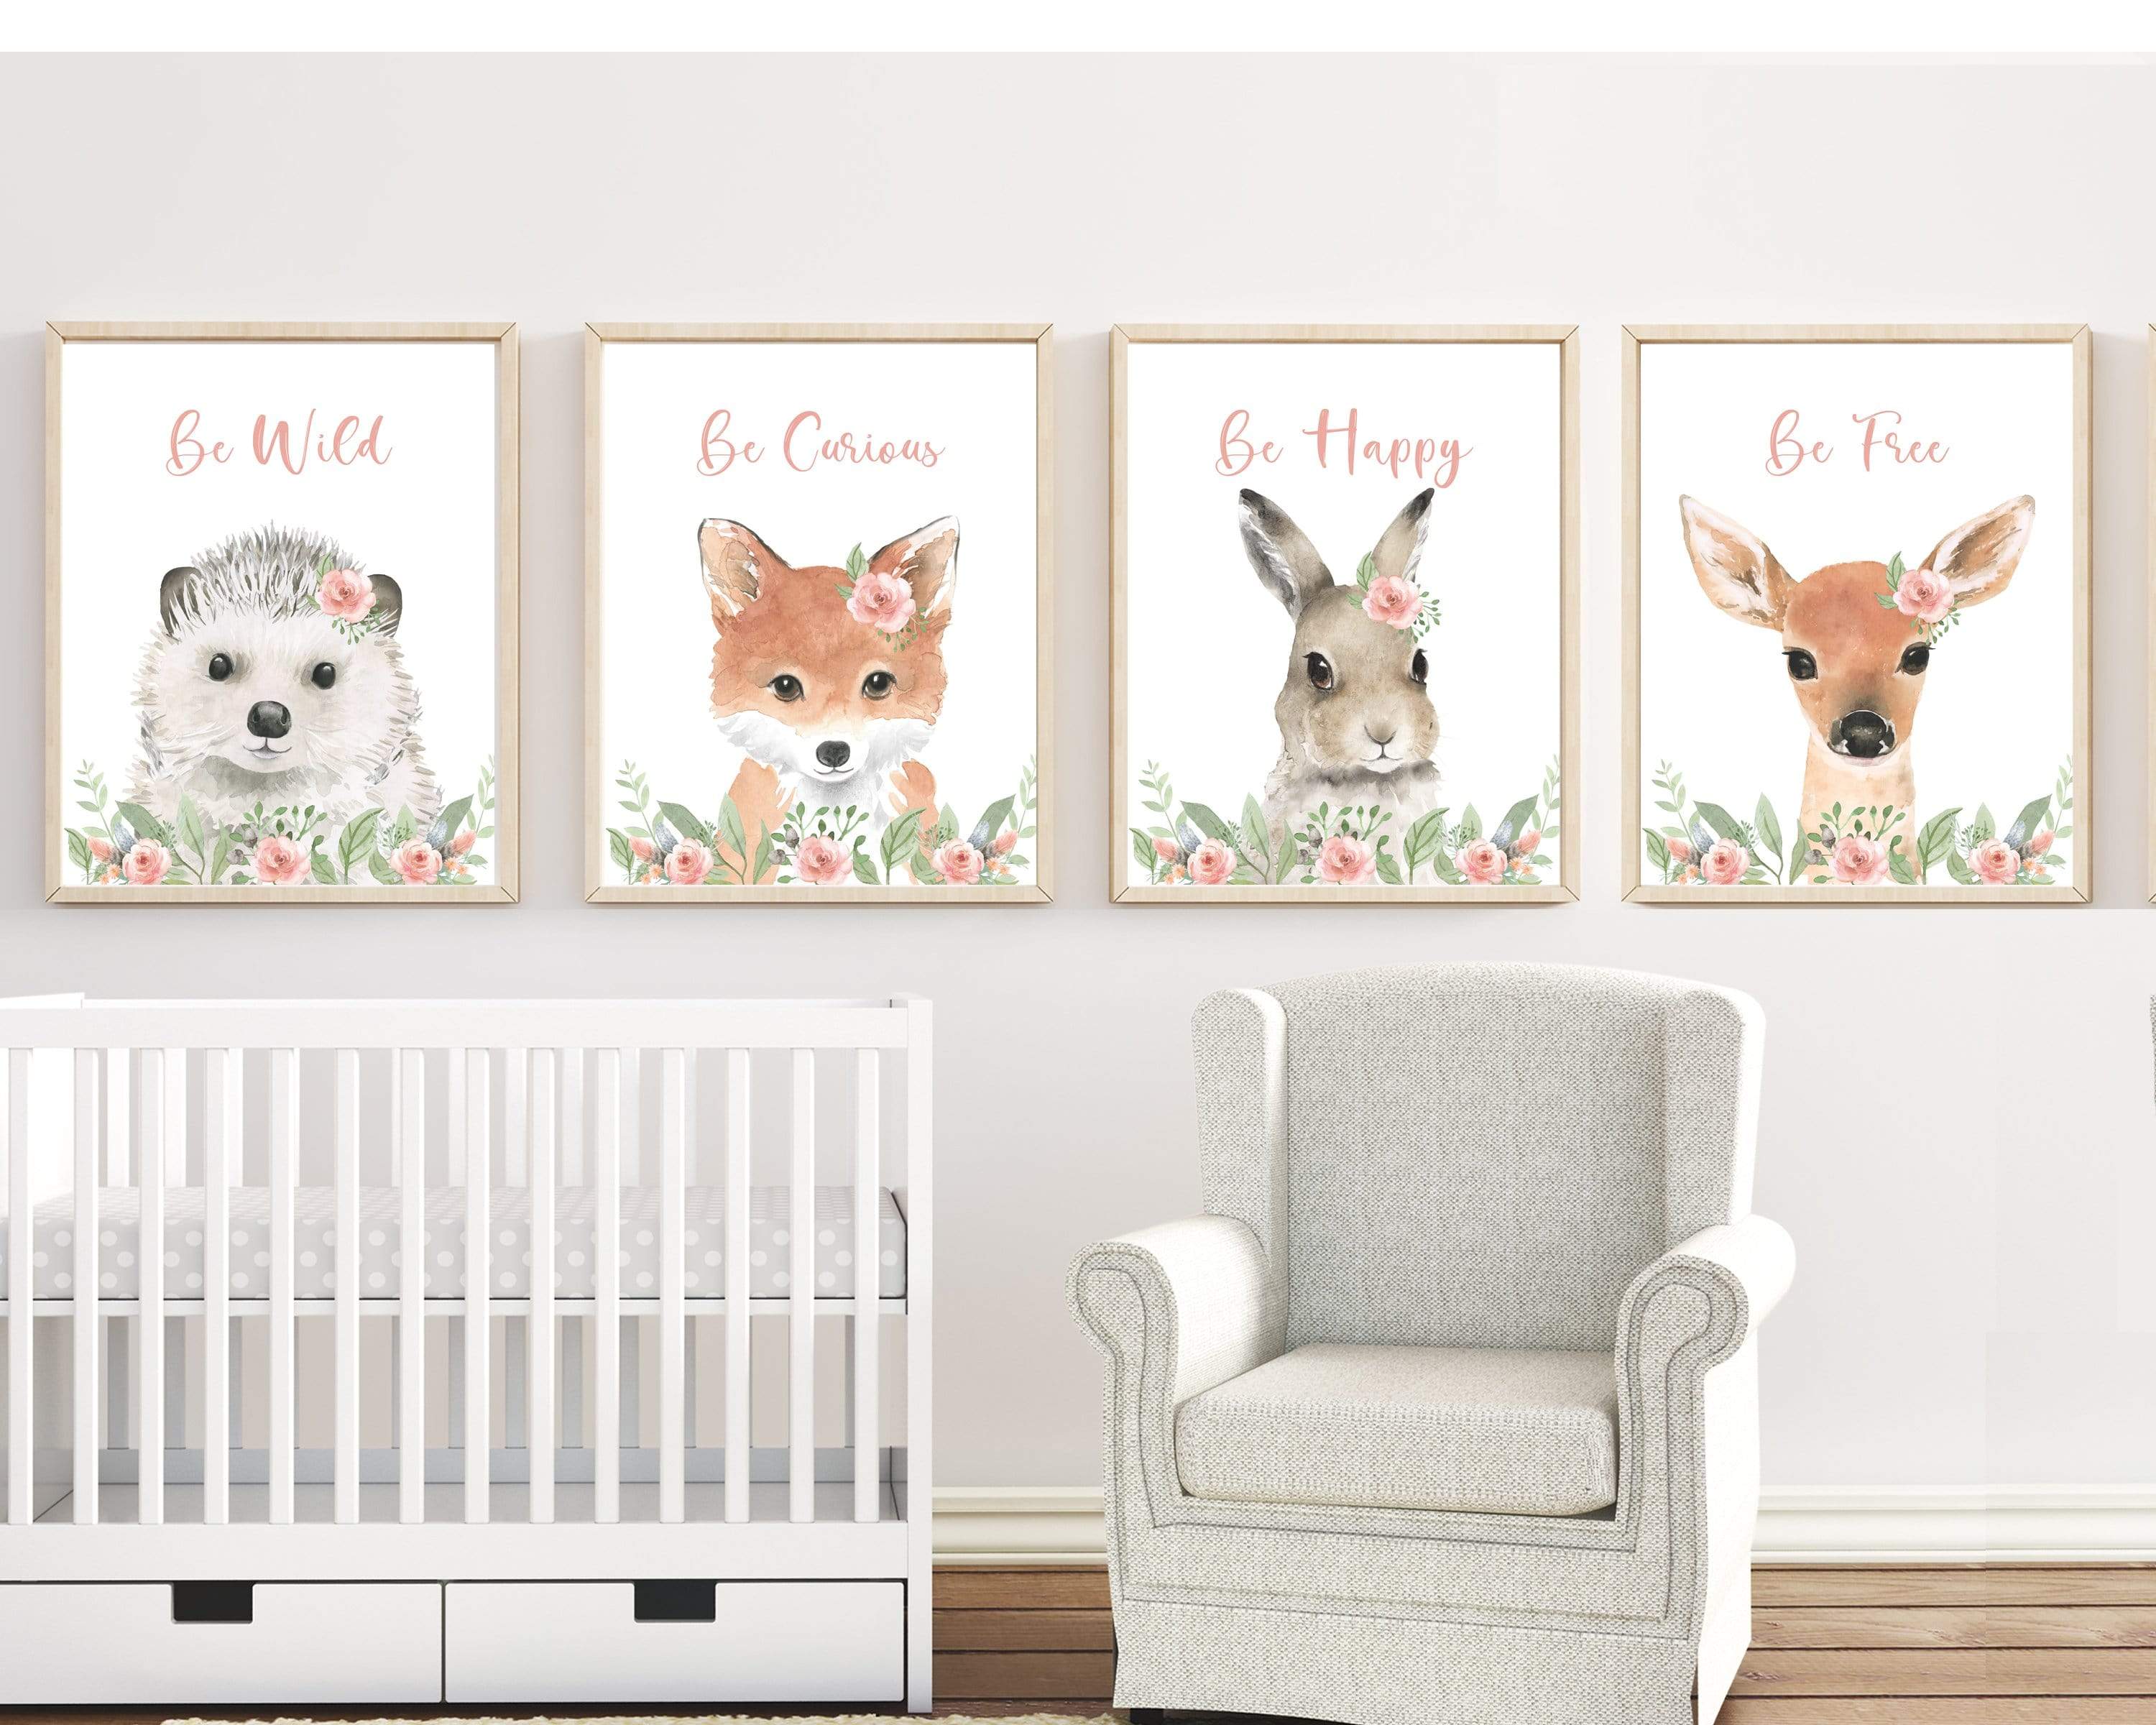 Animals with flowers - Blush pink flowers - Forest animals print - Cute forest animal art - Baby girl nursery art - Woodland animal set nursery art print baby nursery bedroom decor